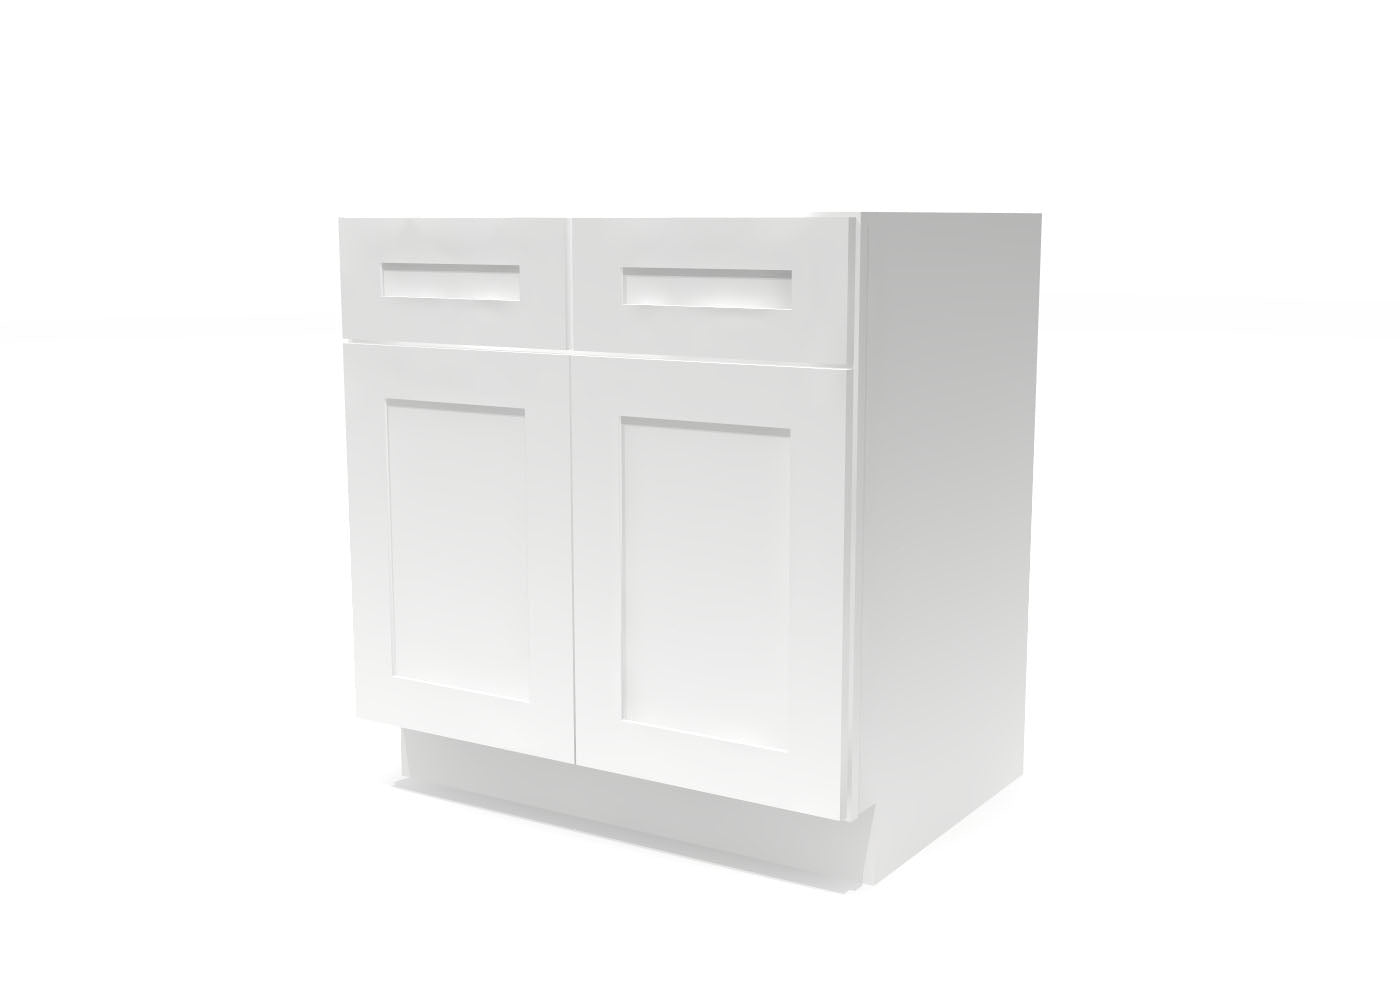 Base Double Door Two Drawers 33" Wide White Shaker Cabinet